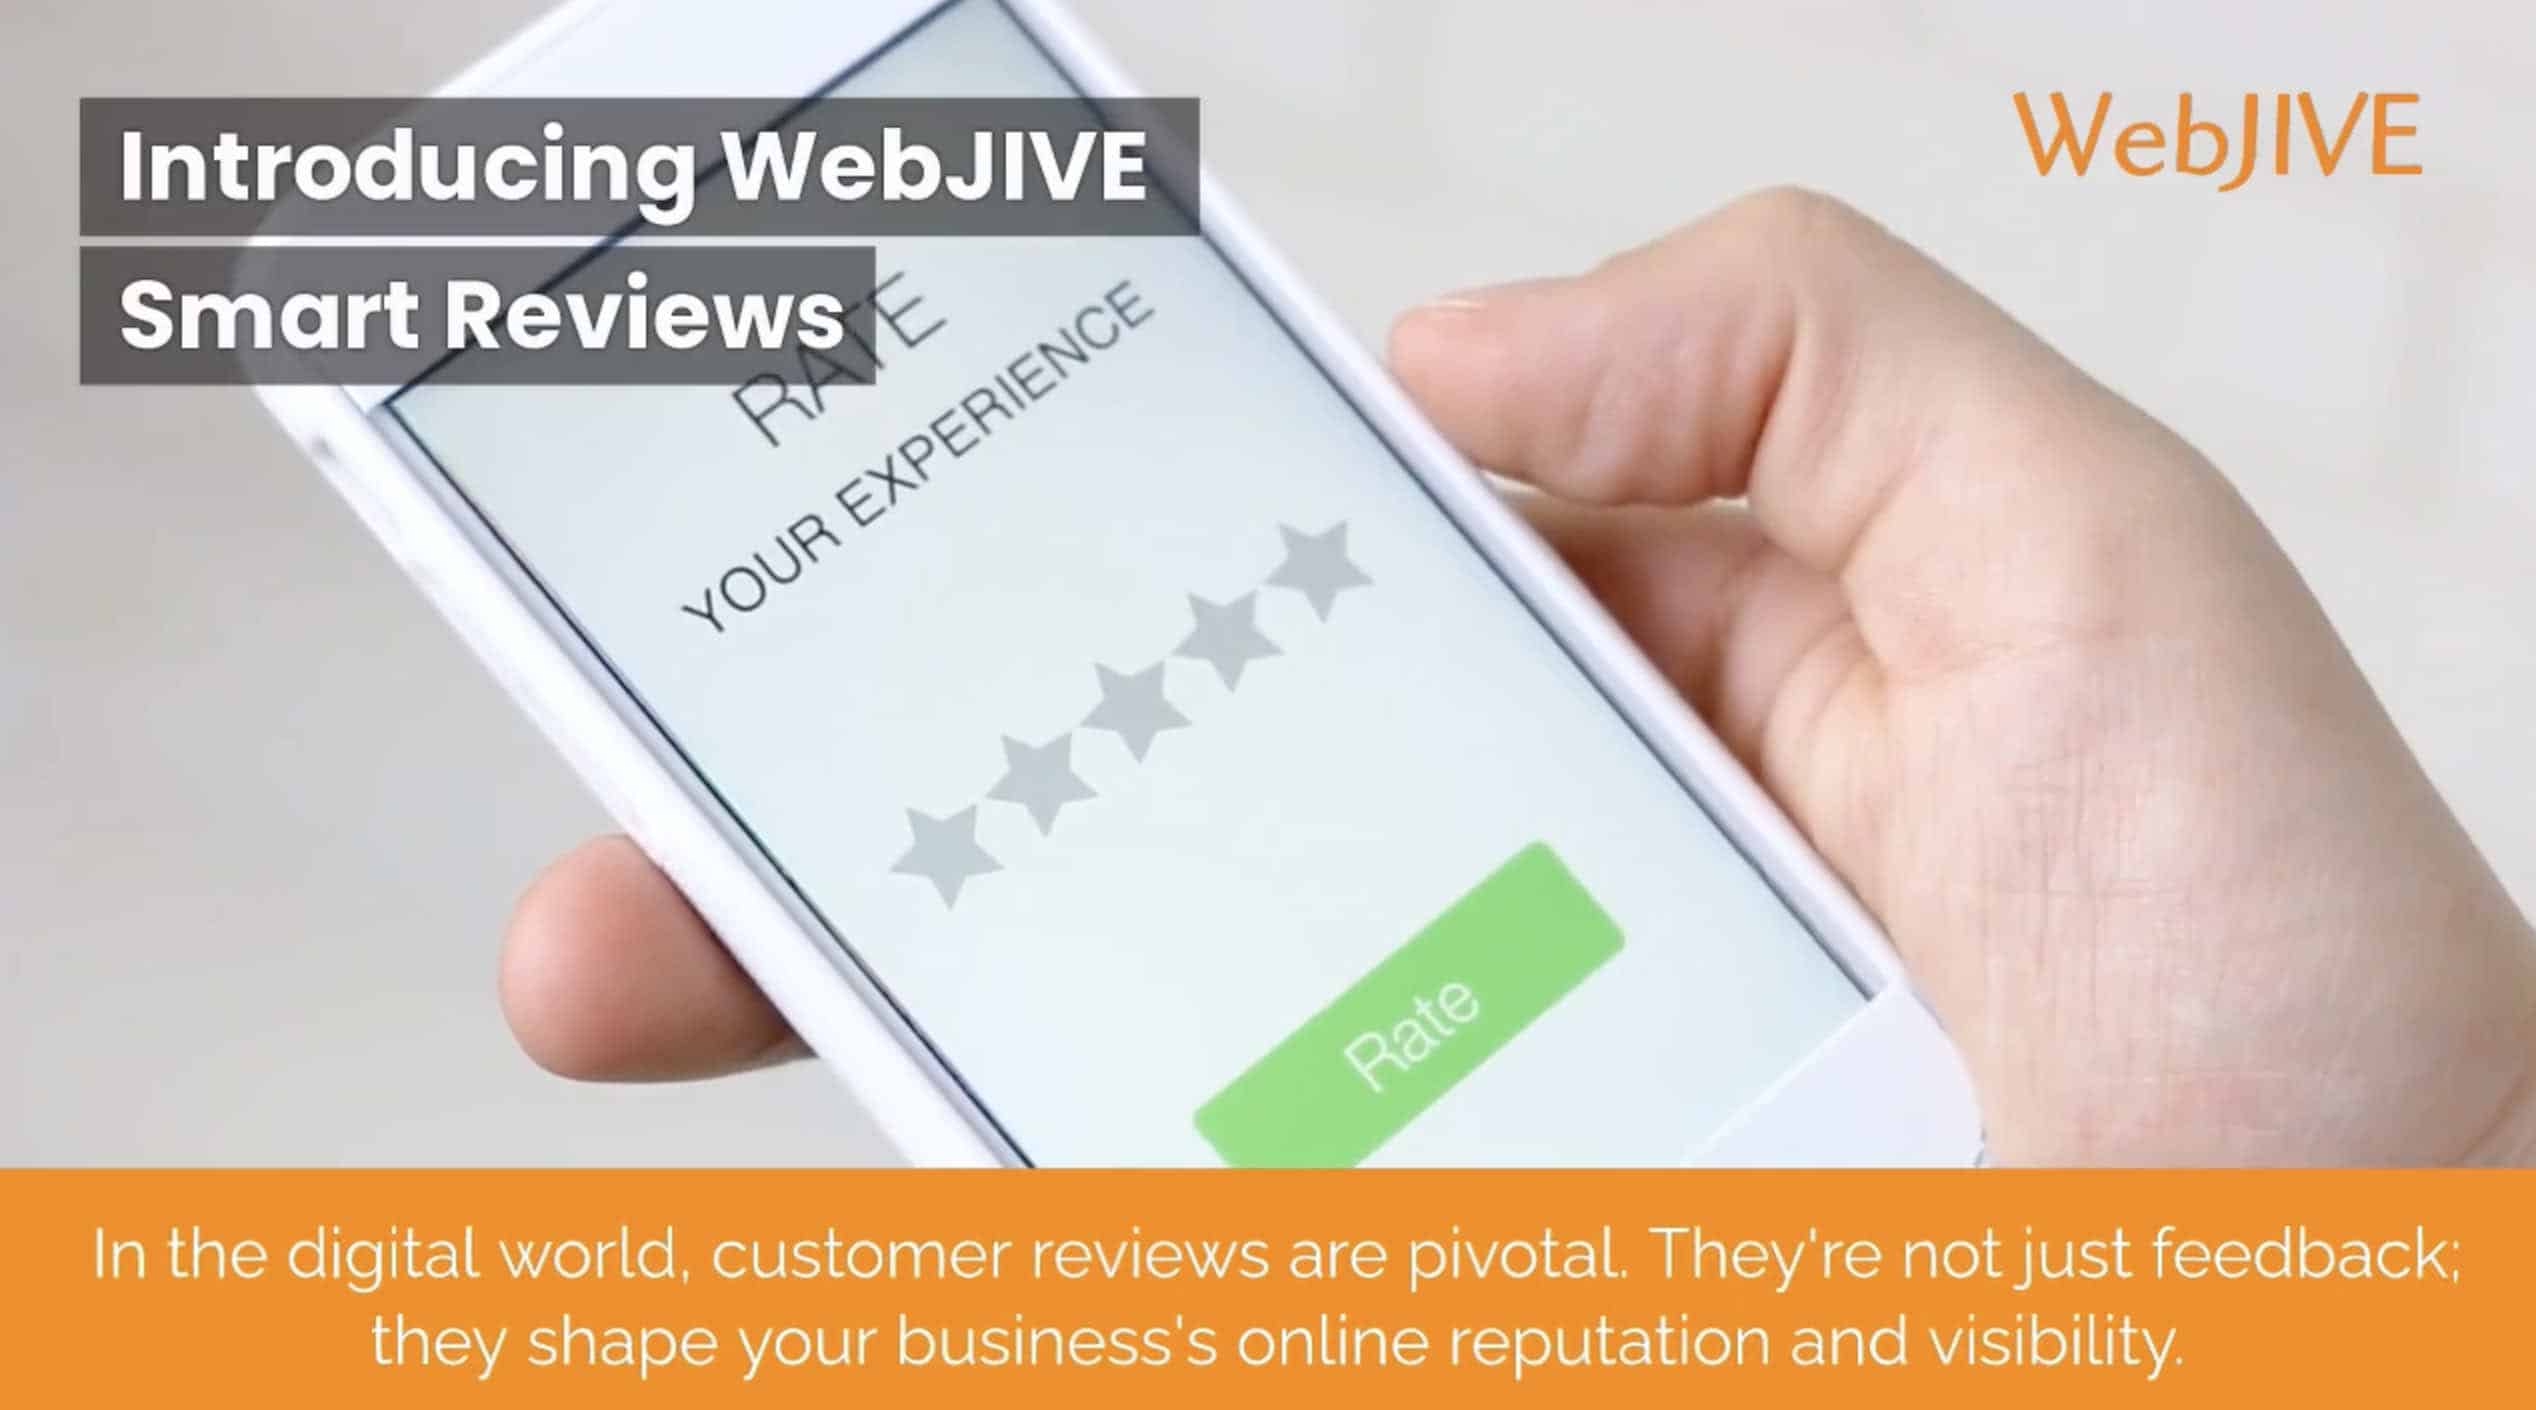 Little Rock Onine Reviews and Reputation Management Sofware and Services by WebJIVE